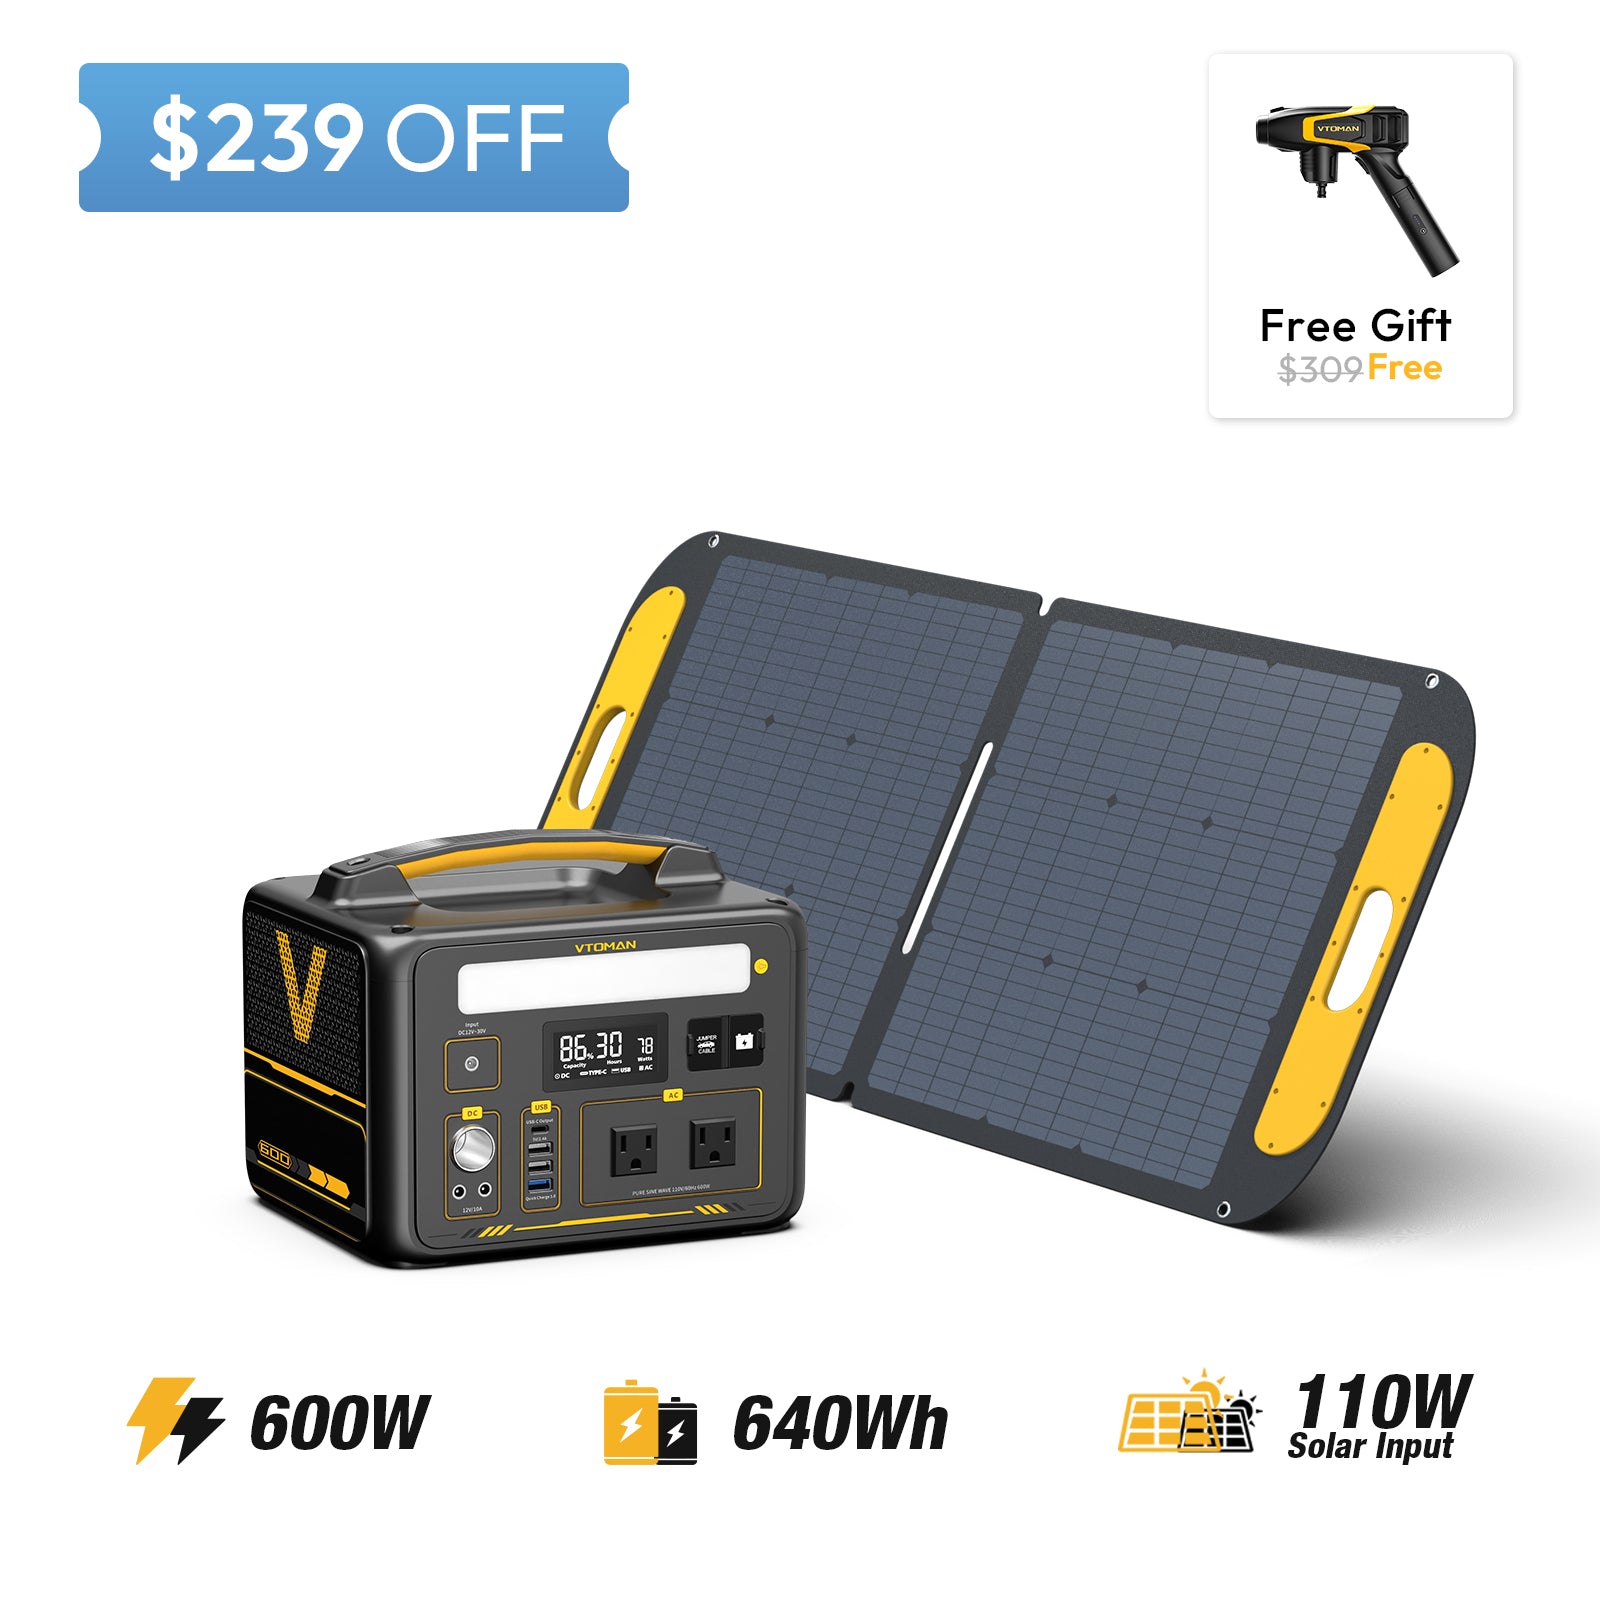 Jump 600-110W solar panel save $239 in summer sale